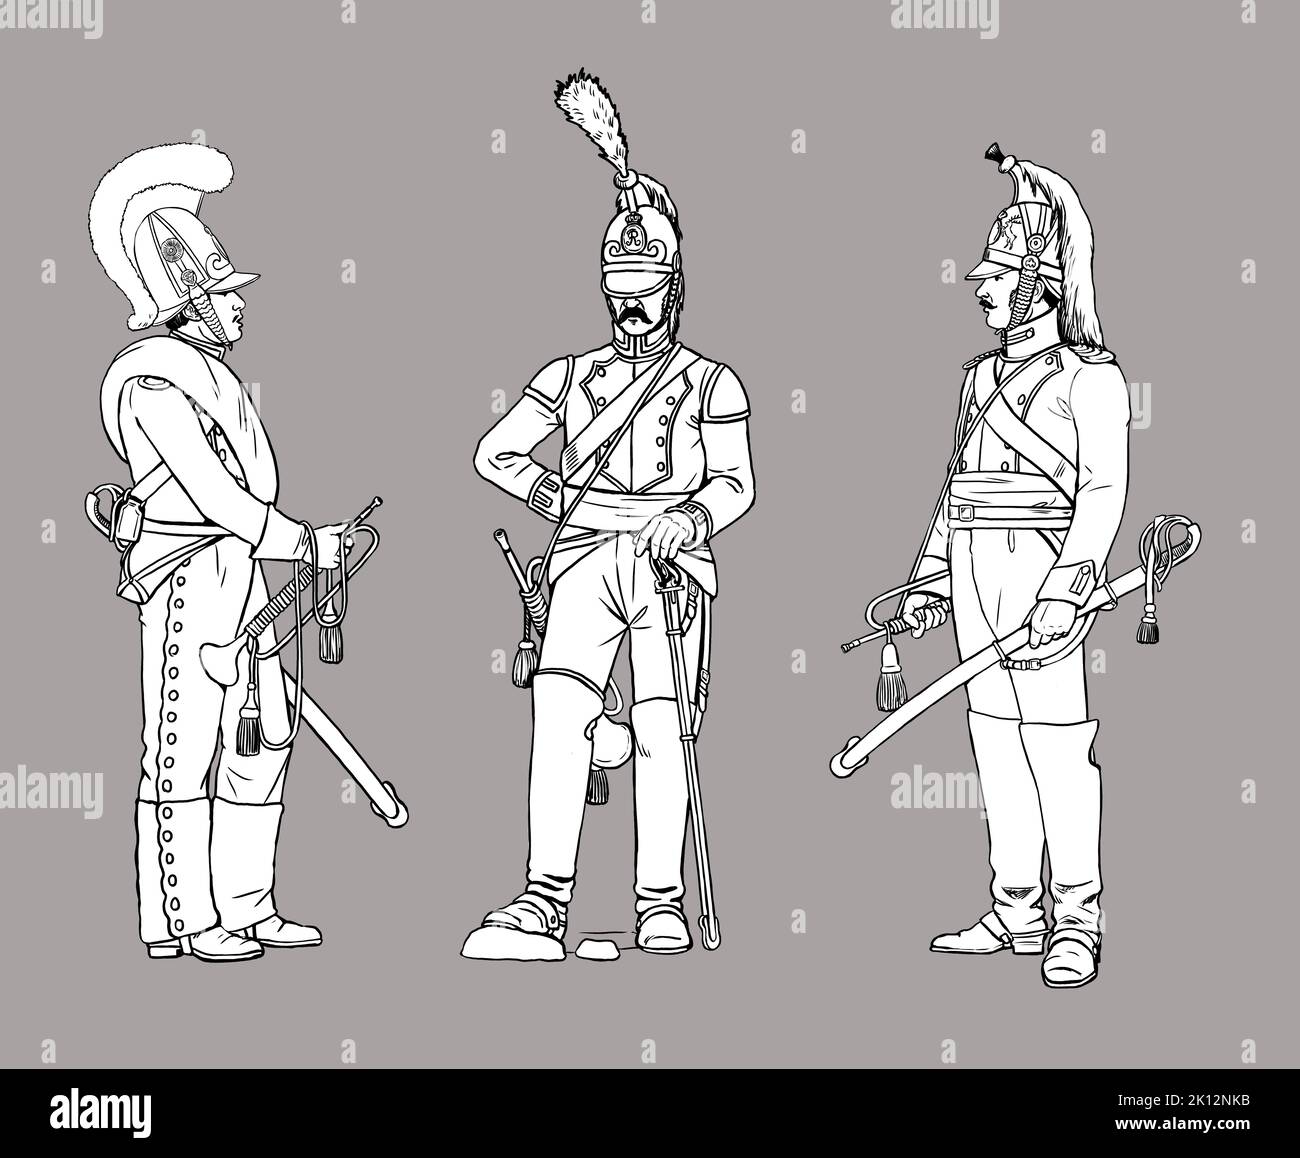 German trumpeters during the Napoleon War. Napoleon Bonaparte and his wars. Historical drawing. Stock Photo